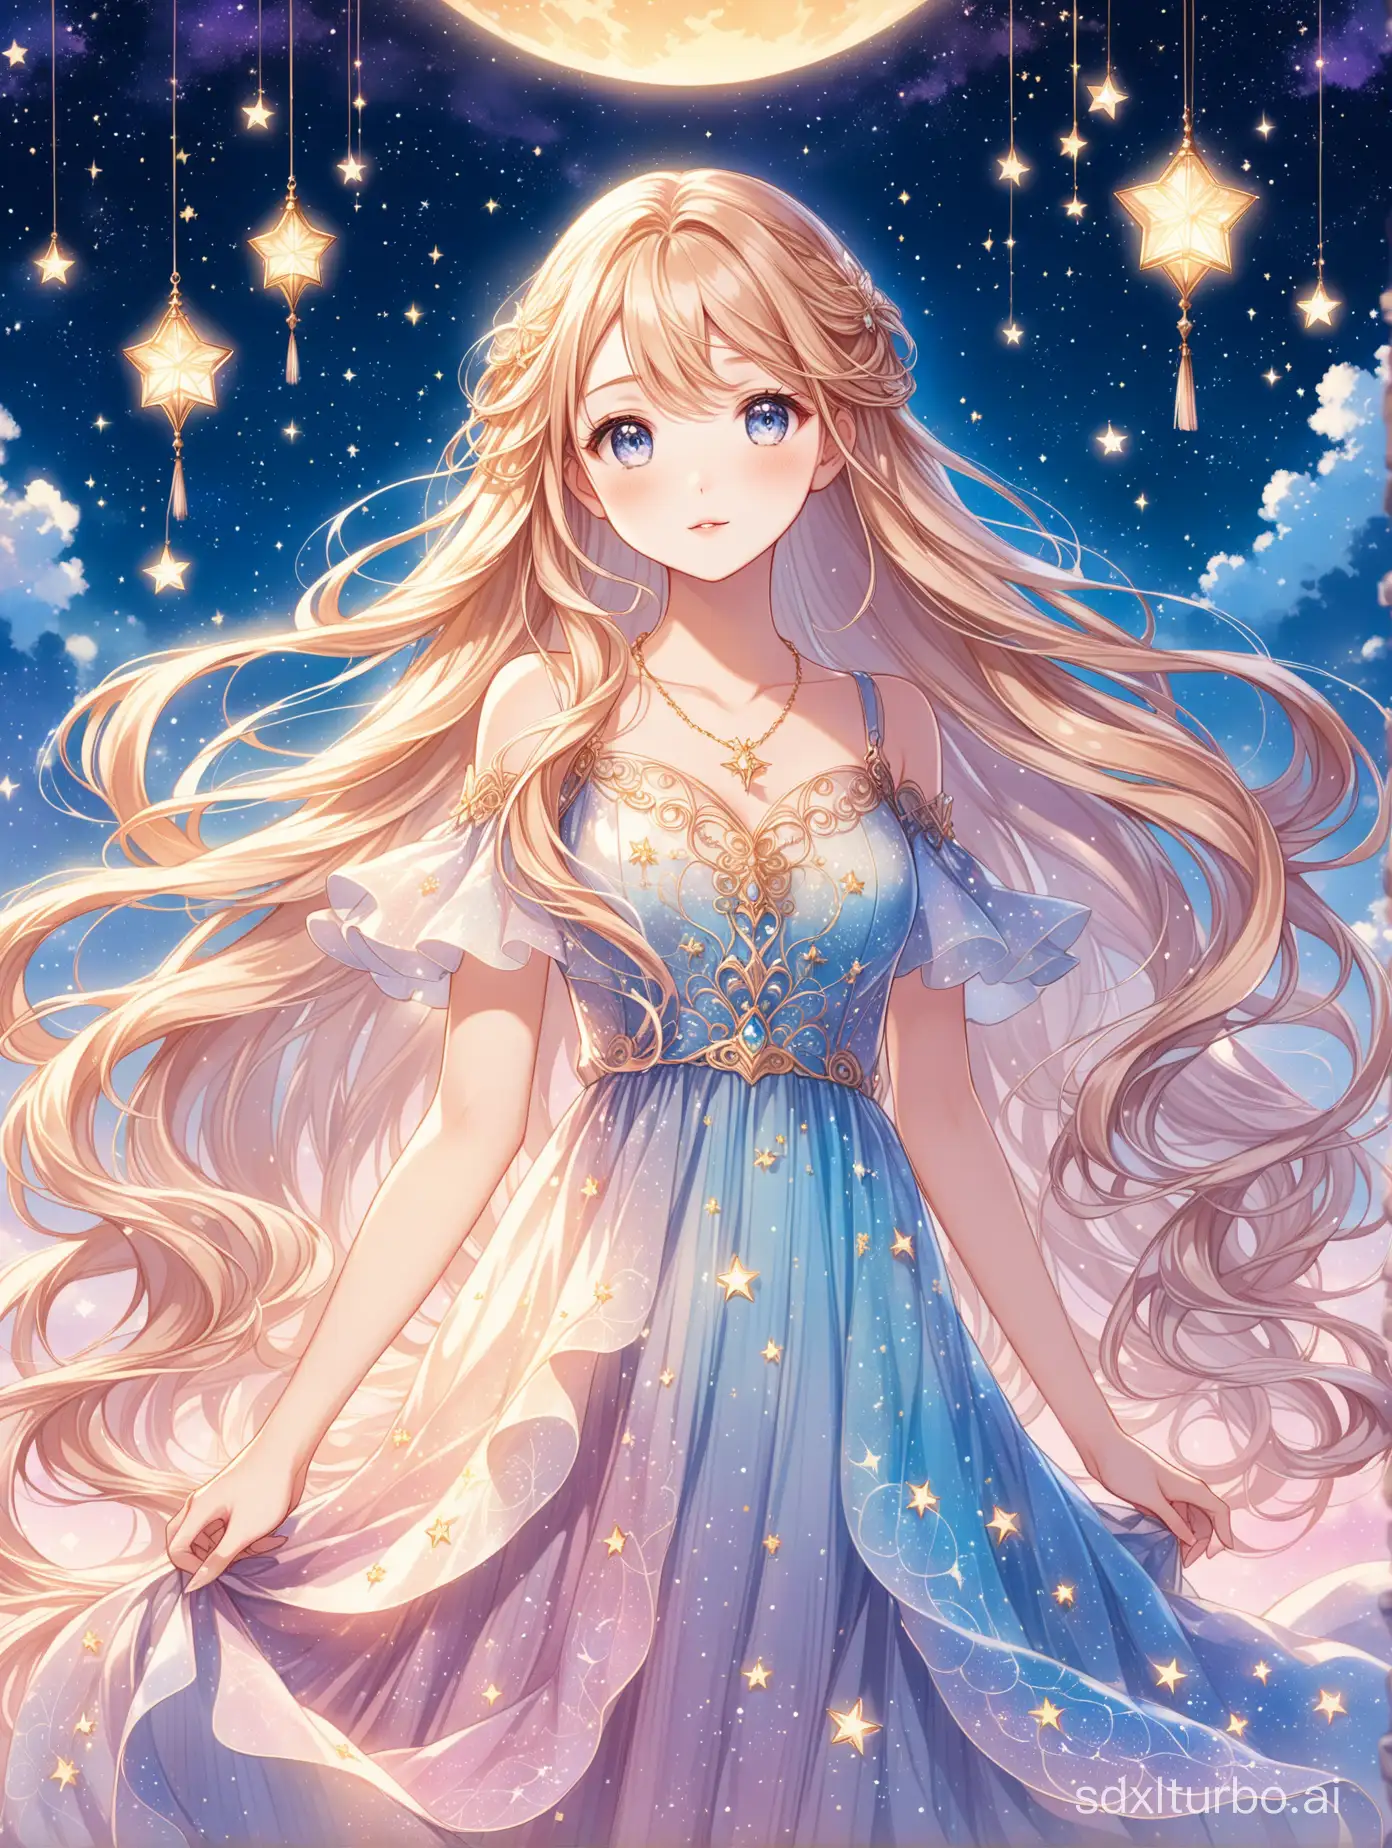 A captivating, full-body anime illustration of a charming girl with long, flowing hair and a beautiful face. Her eyes are large and expressive, filled with innocence and cuteness. The character wears a stunning dress adorned with delicate patterns and a gold necklace, complementing her ethereal appearance. The sky behind her is filled with stars, creating a dreamy and fantastical atmosphere. The character's hair features two different shades, one lighter near the roots, and one darker towards the tips, giving it a unique and soft luster. The overall style of the artwork is dreamy and romantic, inspired by the enchanting world of anime.